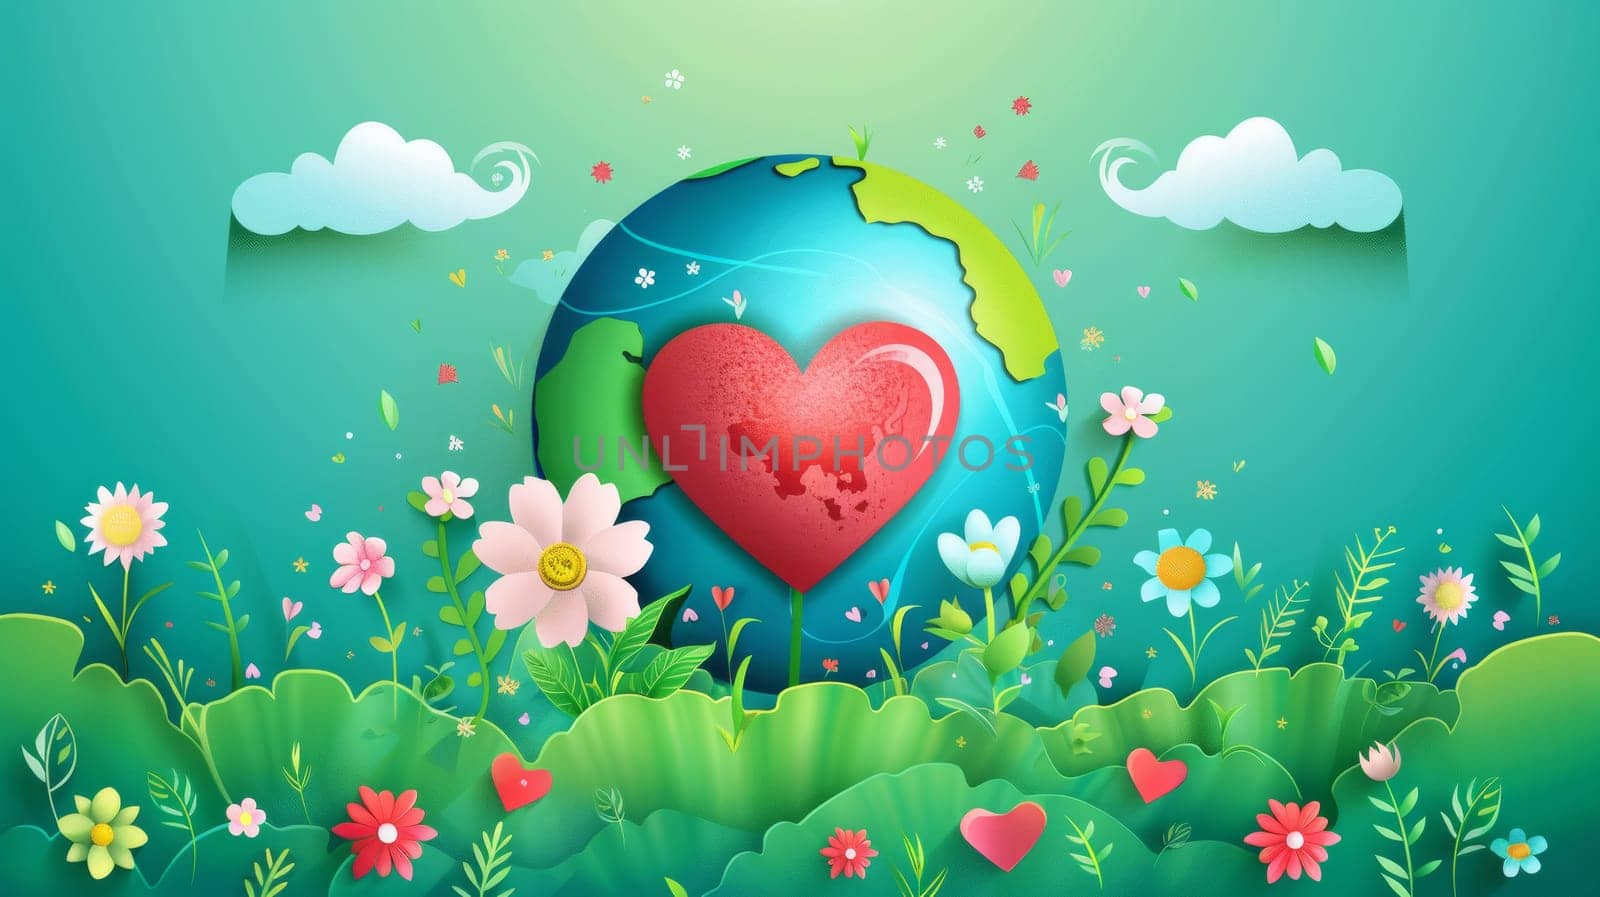 A happy Earth Day concept background with globe, flower, earth hugging heart and cloud. Sustainable illustration design for web, banners, campaigns, and social media.